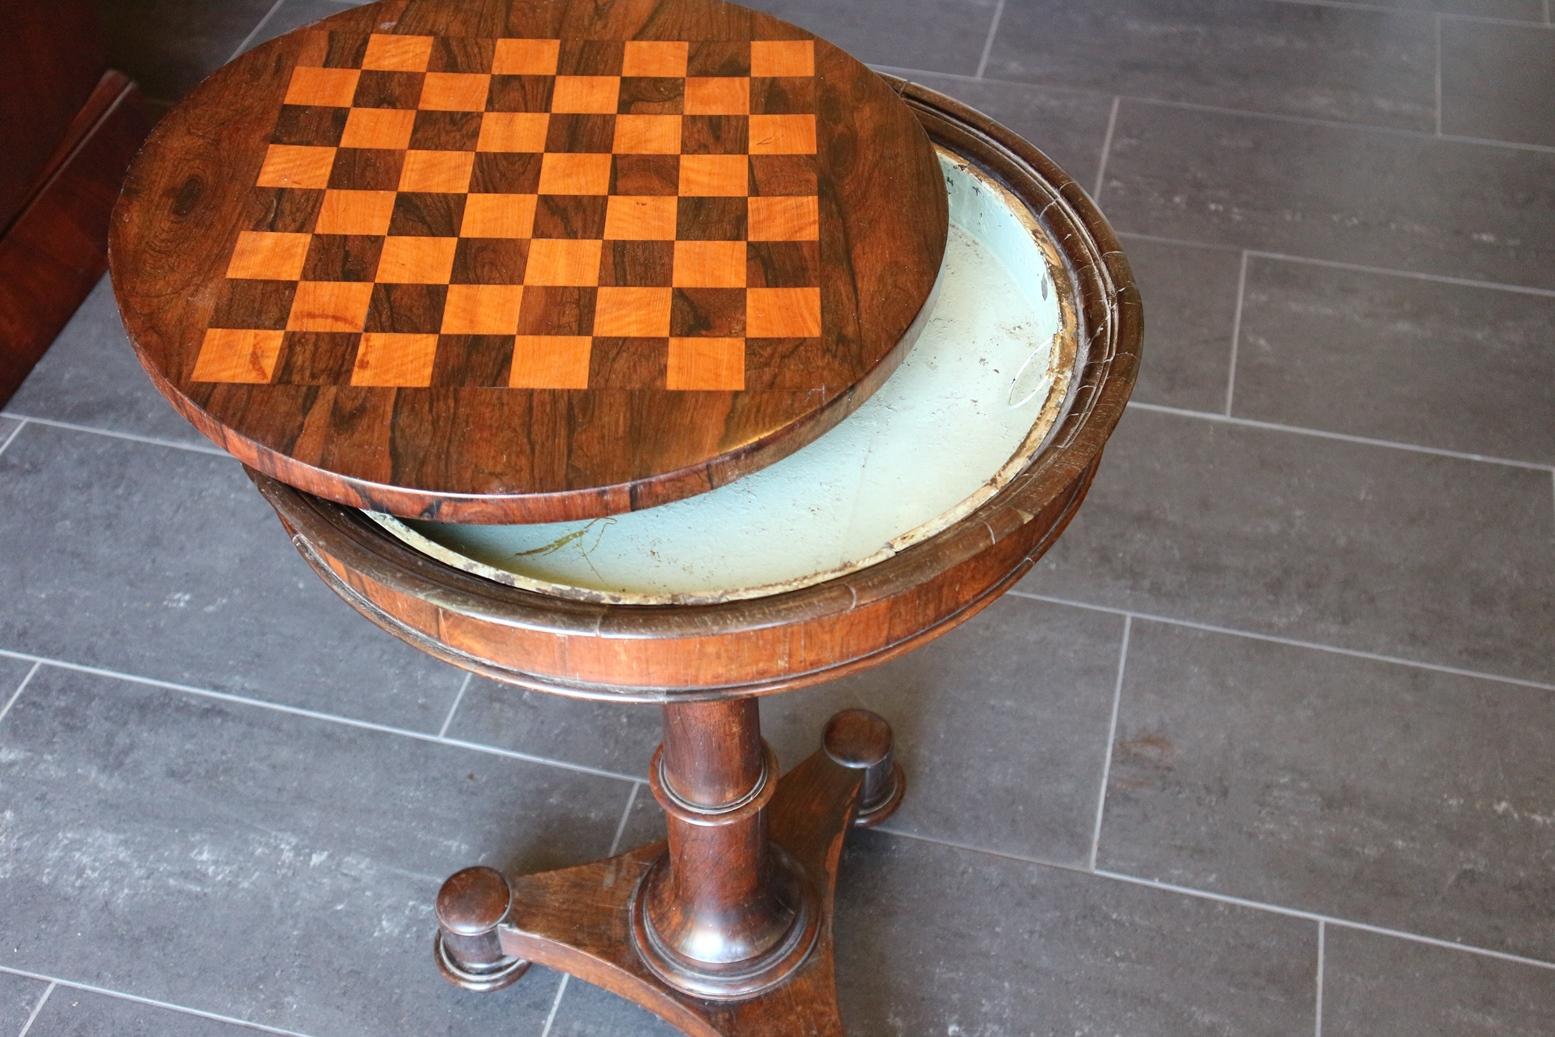 English Beautiful 18th Century Antique Rosewood Wooden Chess Table in Original Condition